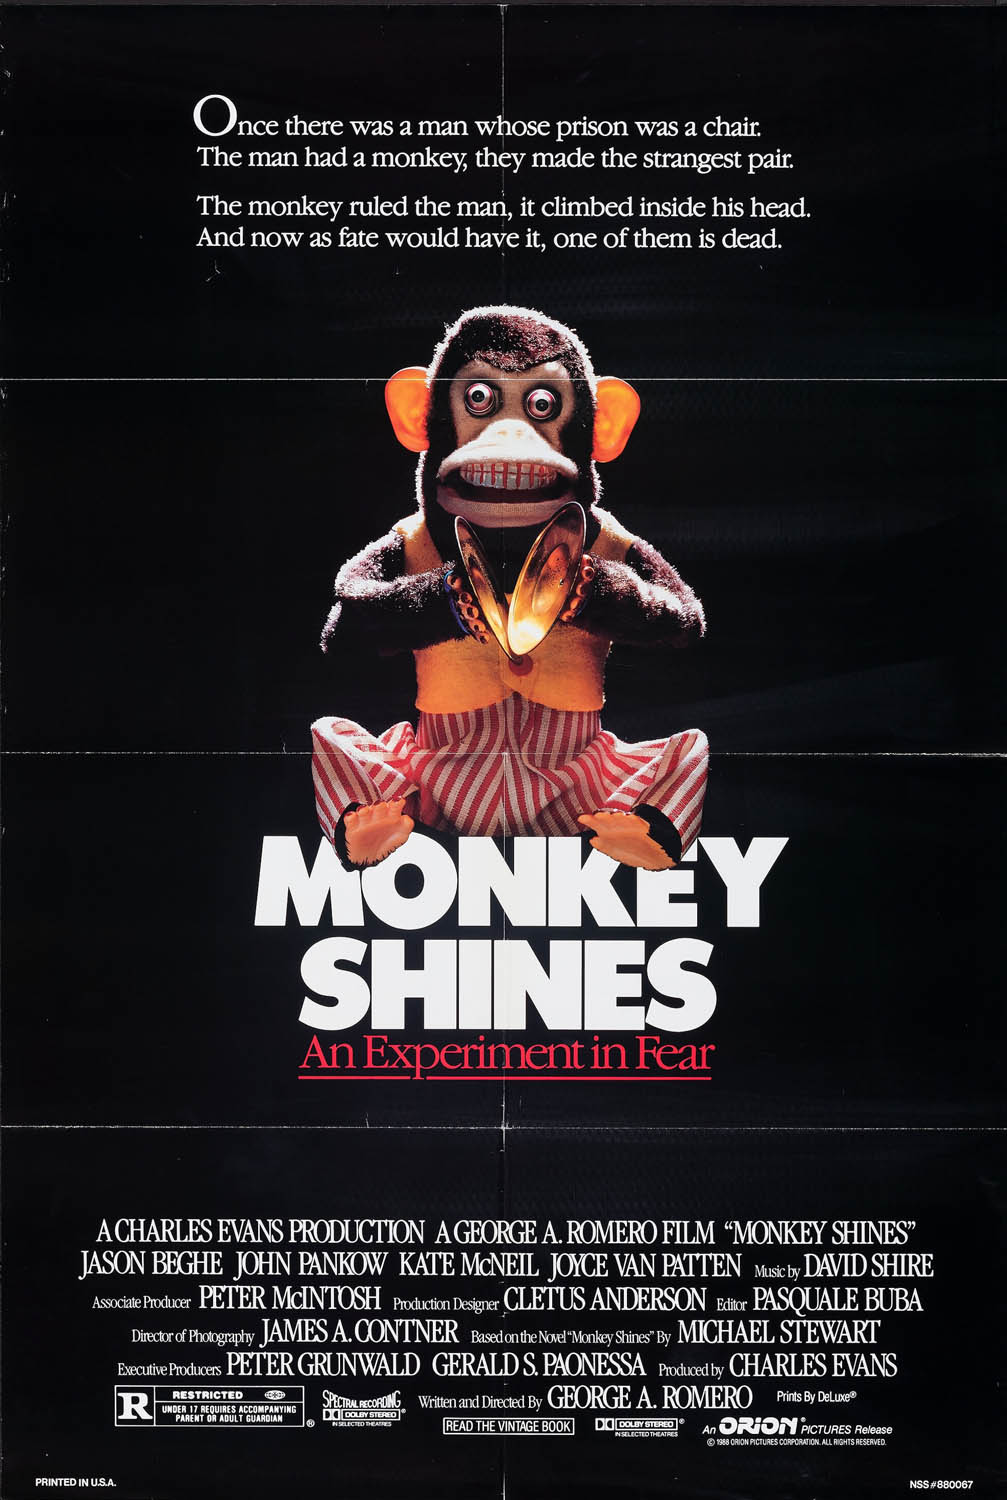 MONKEY SHINES: AN EXPERIMENT IN FEAR